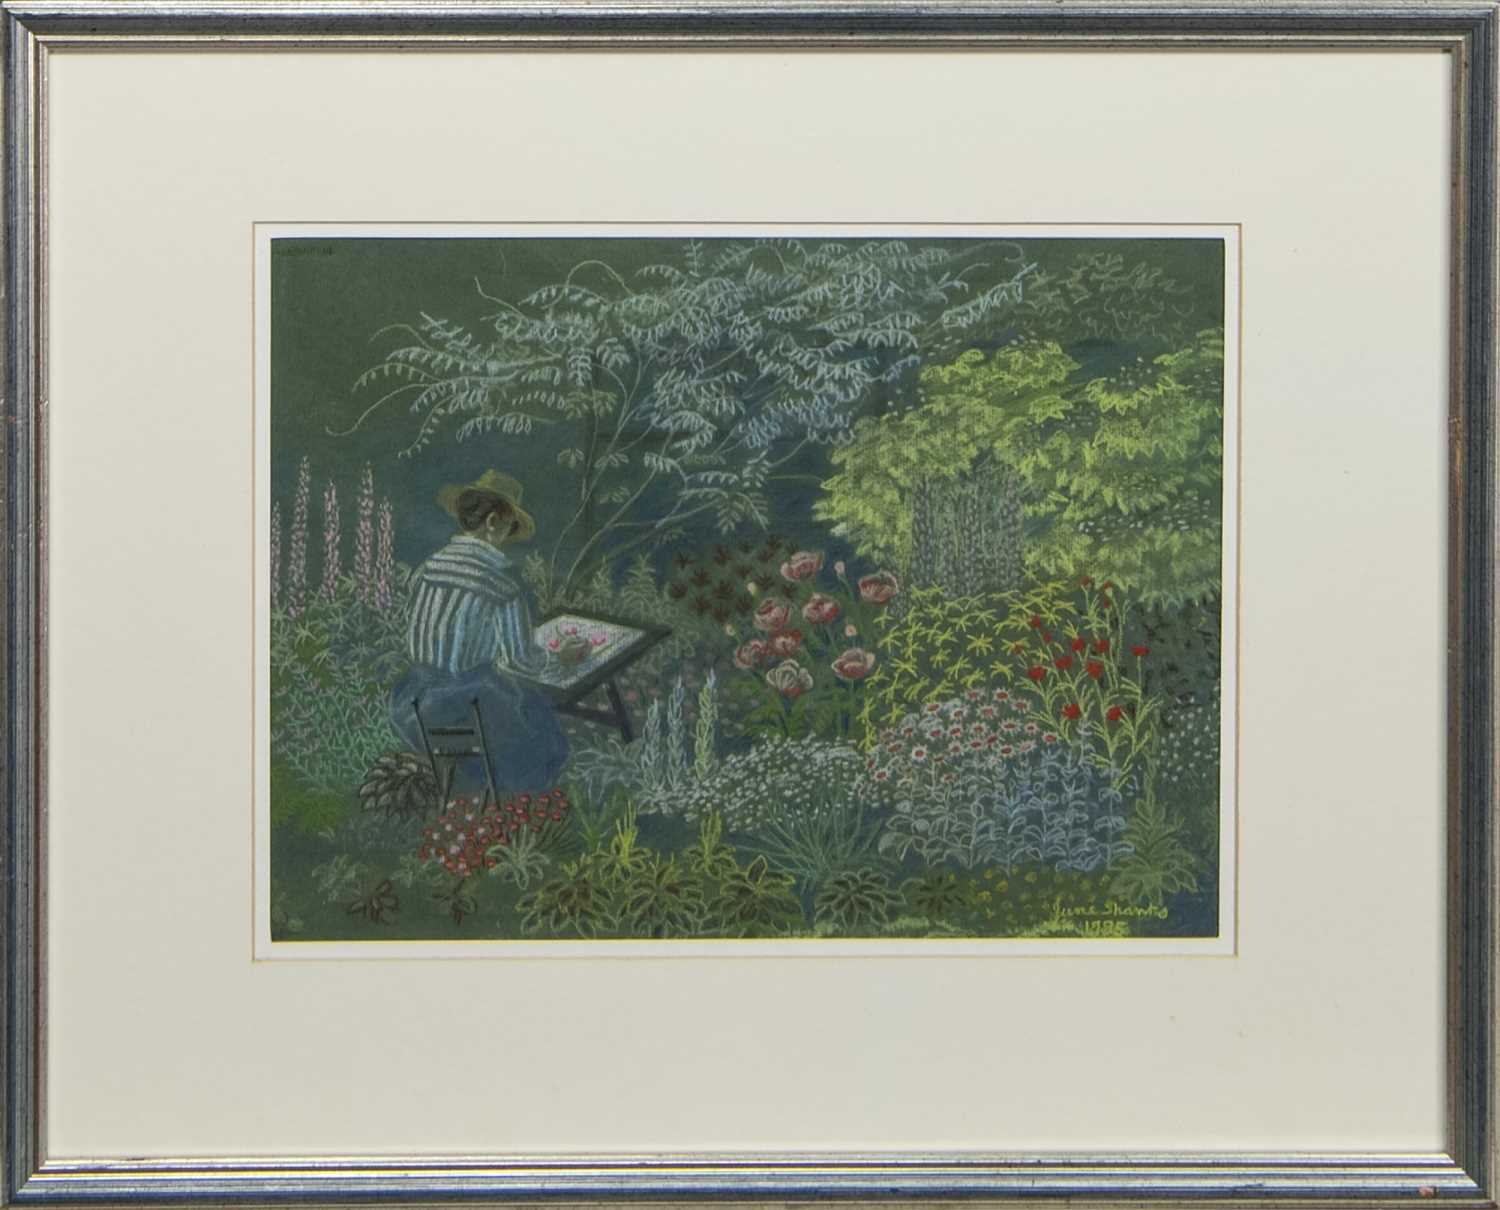 Lot 462 - SKETCHING IN THE GARDEN, A PASTEL BY JUNE SHANKS